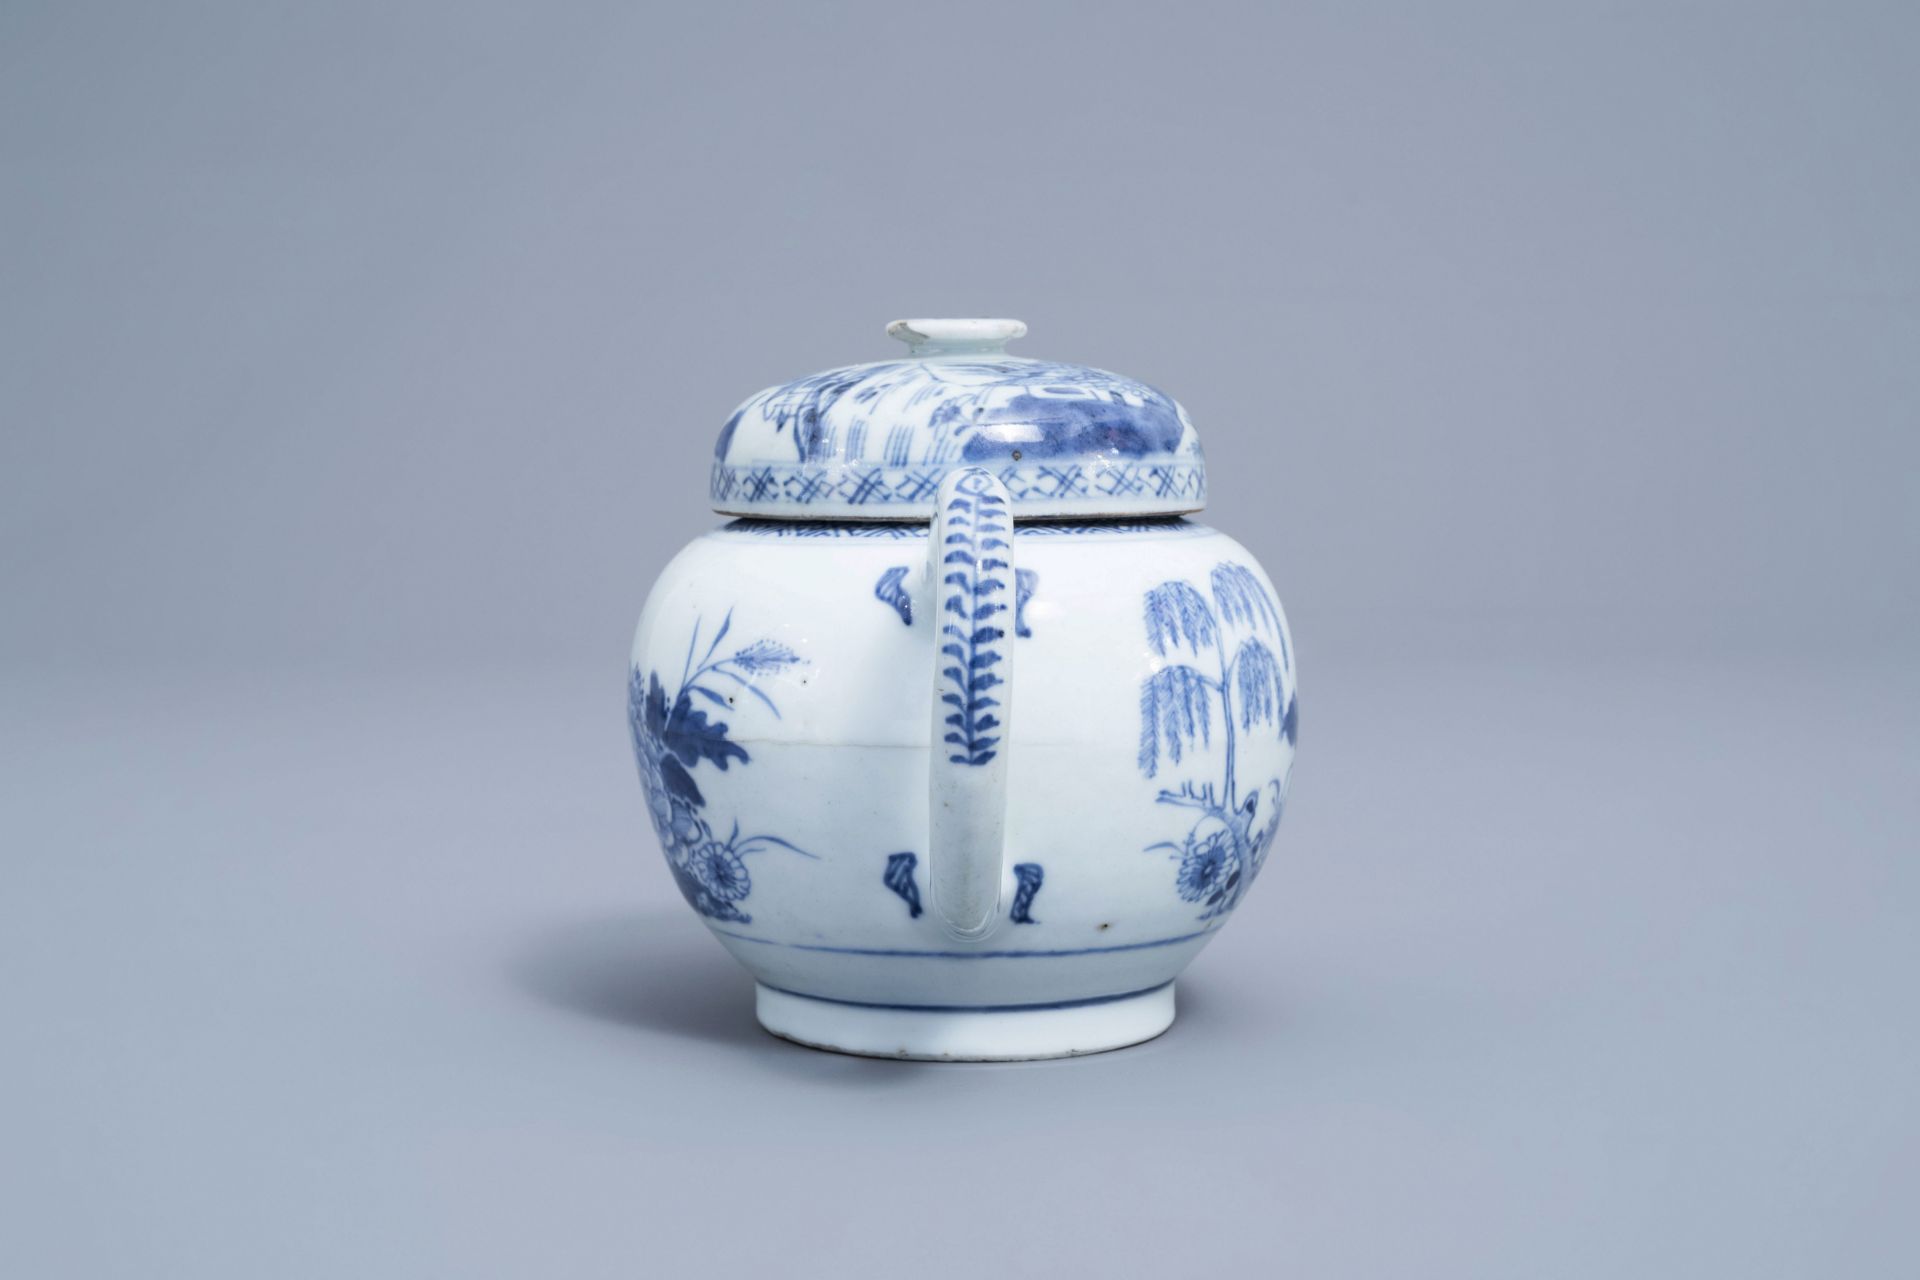 A varied collection of Chinese blue and white porcelain, 18th C. and later - Image 10 of 54